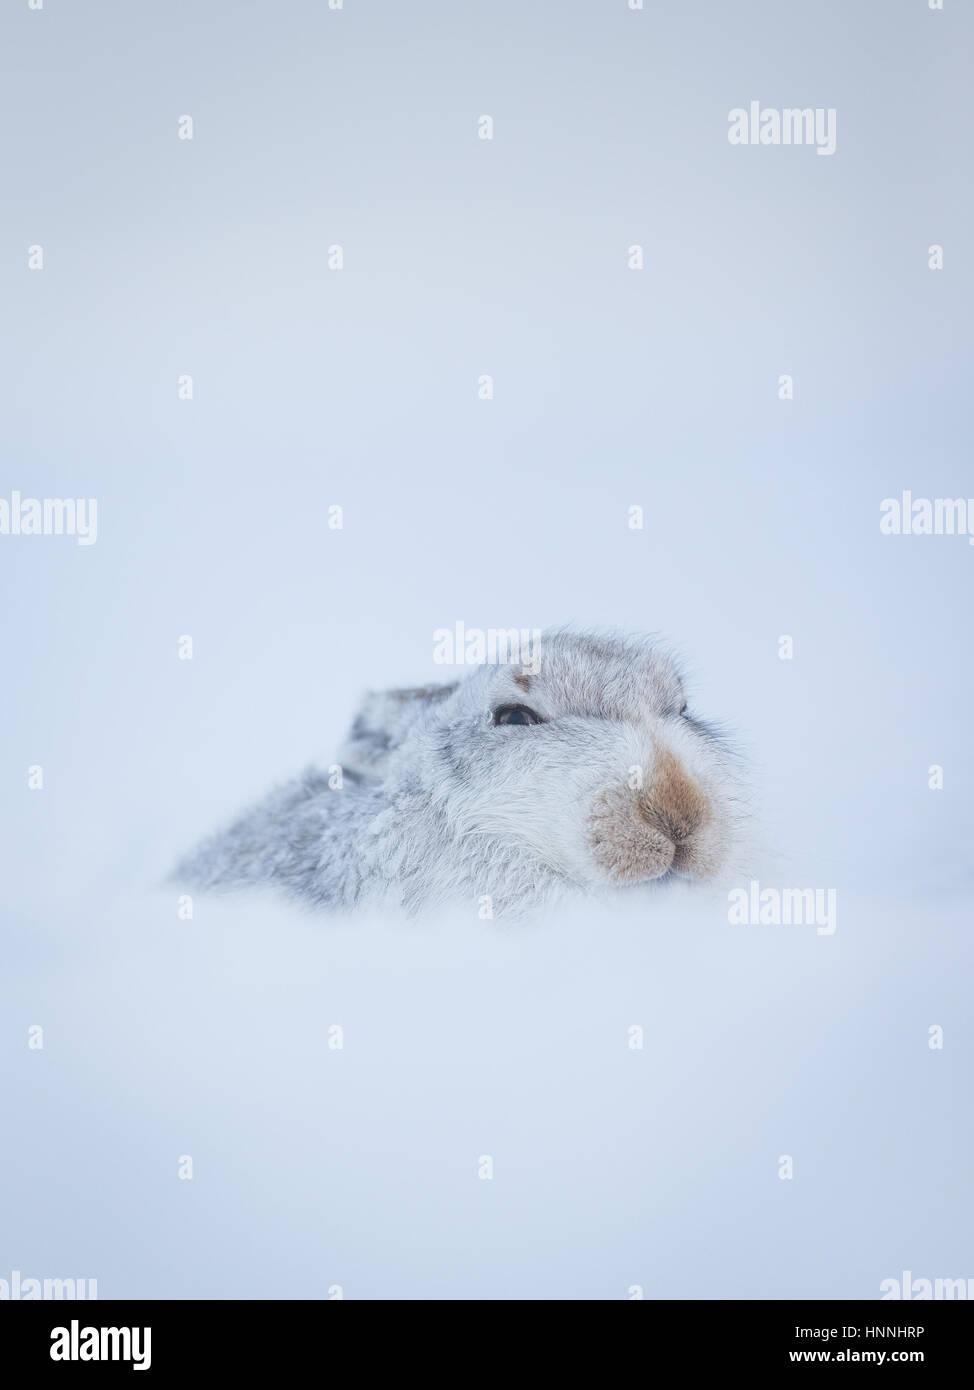 Scottish Mountain Hare (Lepus timidus) hunkered down in snowy landscape. Cairngorms National Park, Highlands, Scotland, Great Britain Stock Photo